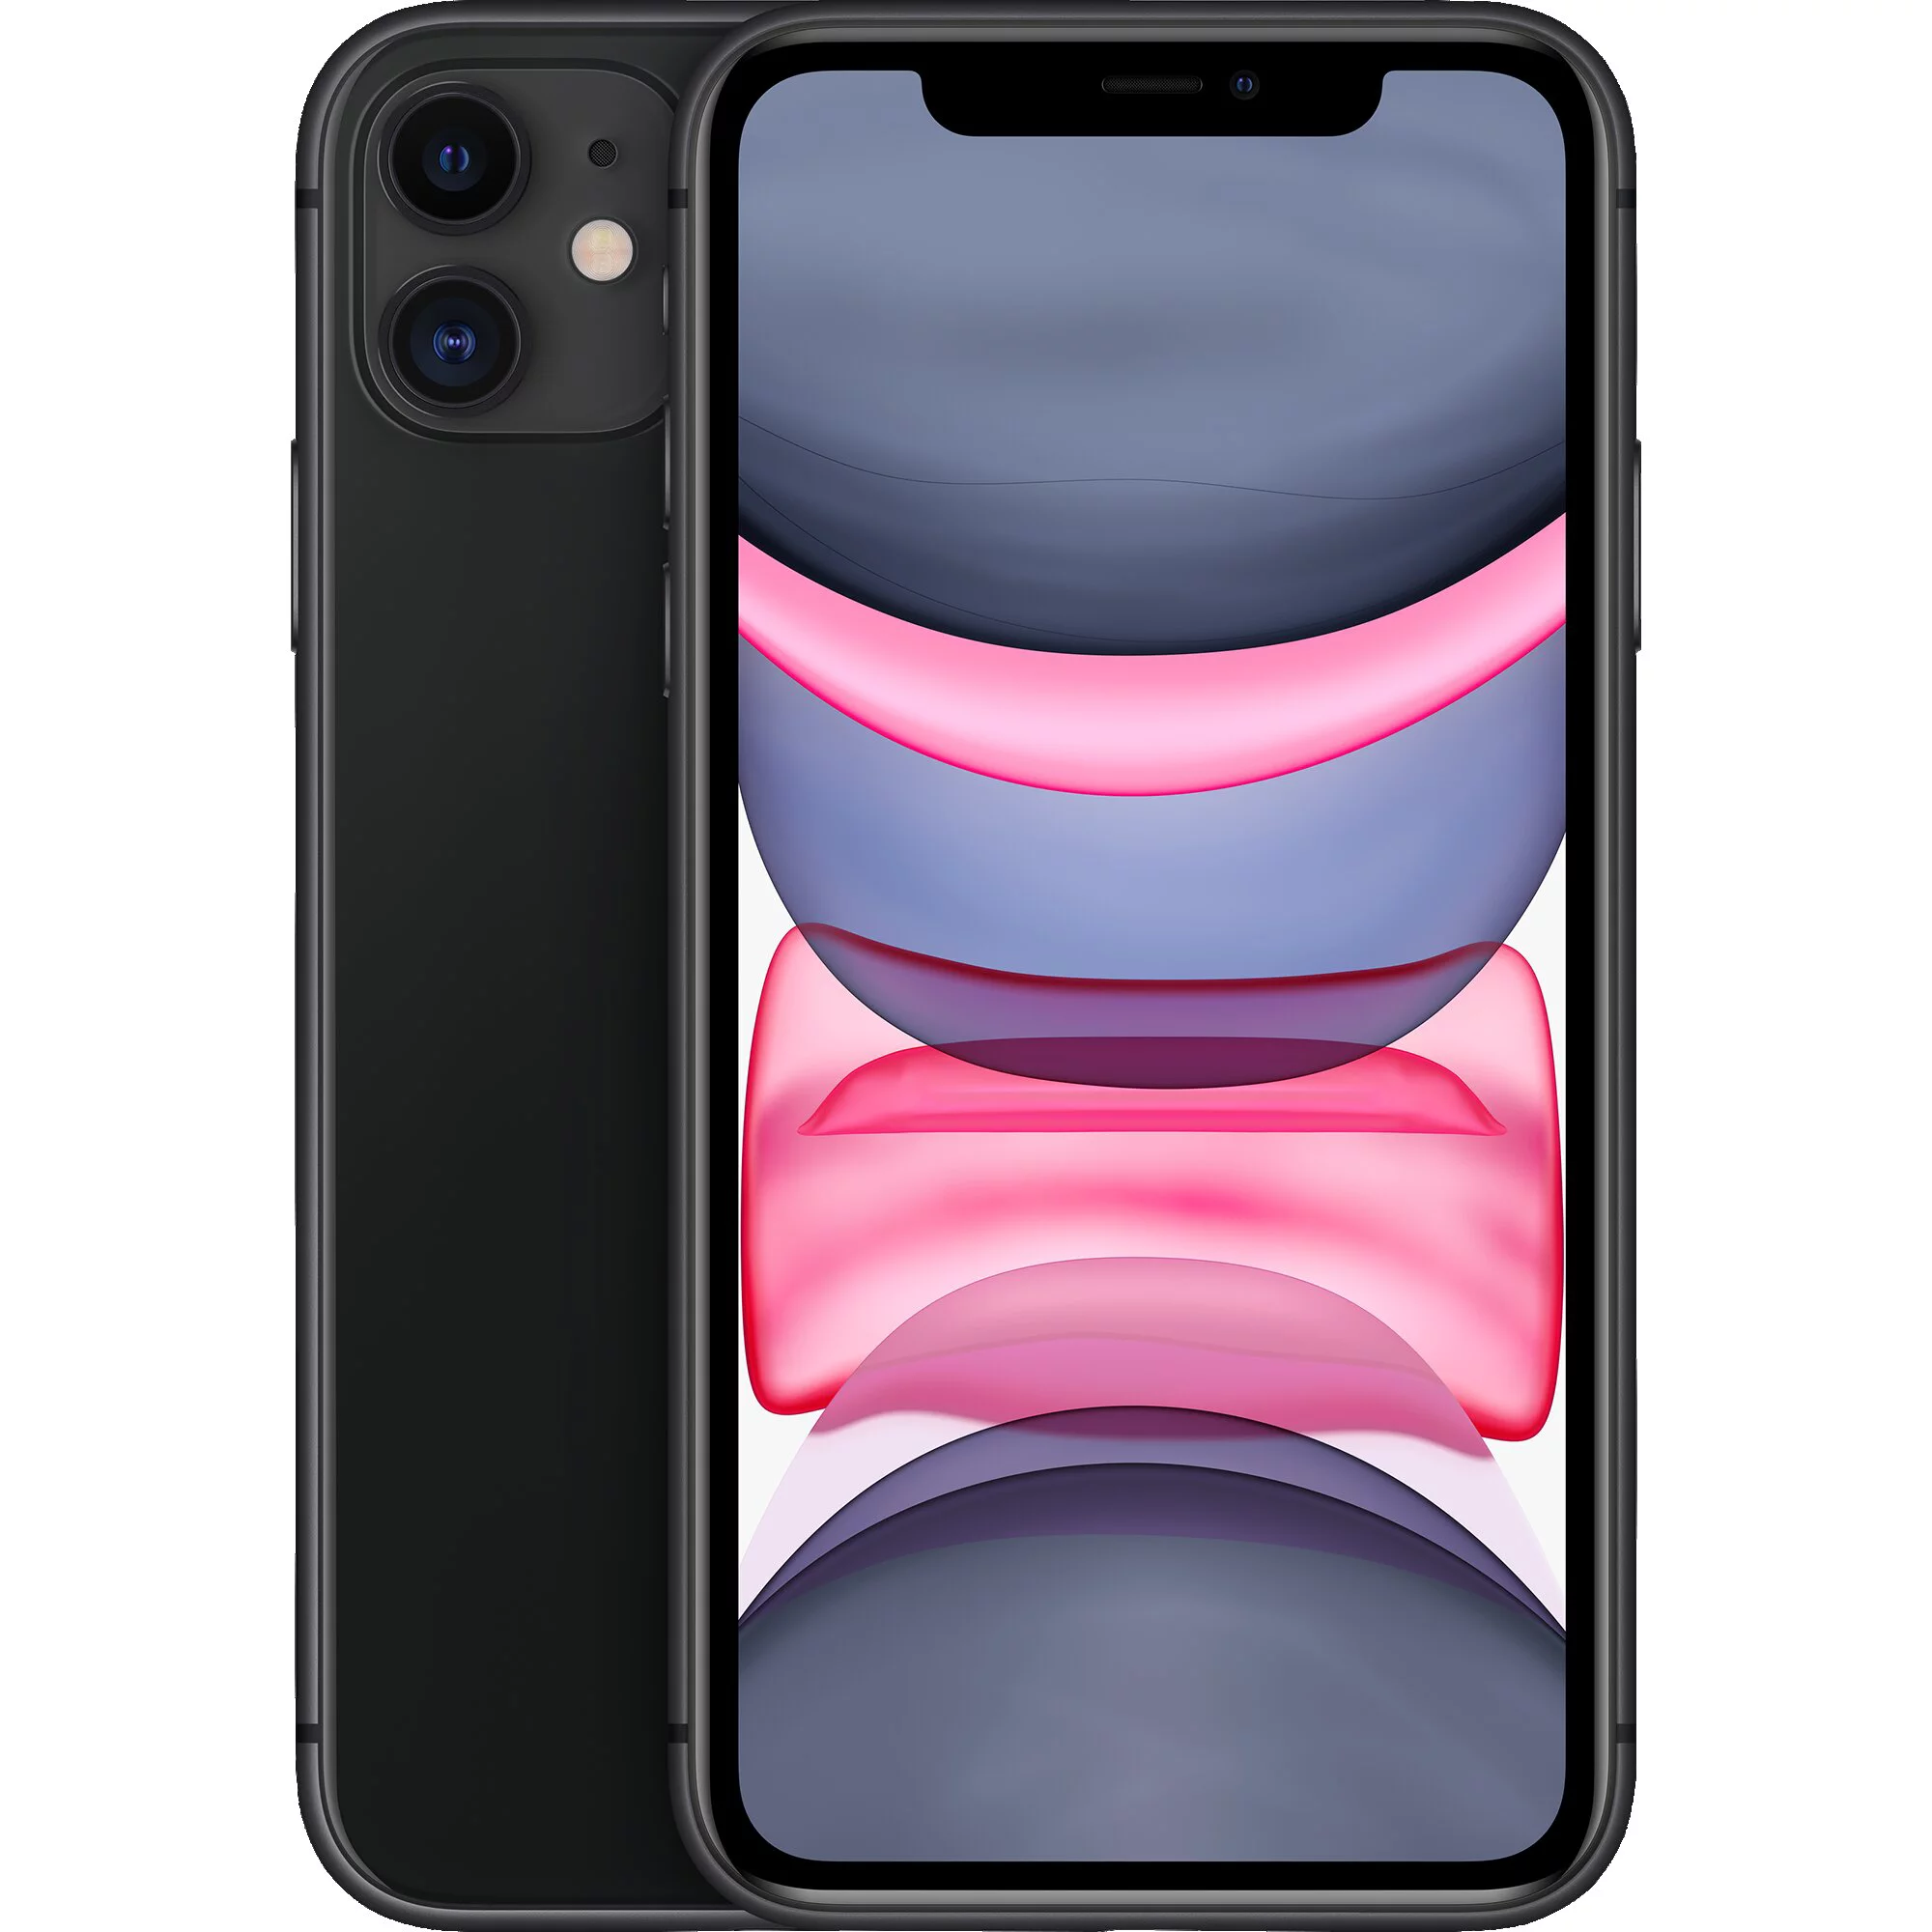 DX Offers Mall Family Mobile Apple iPhone 11, 64GB, Black- Prepaid Smartphone